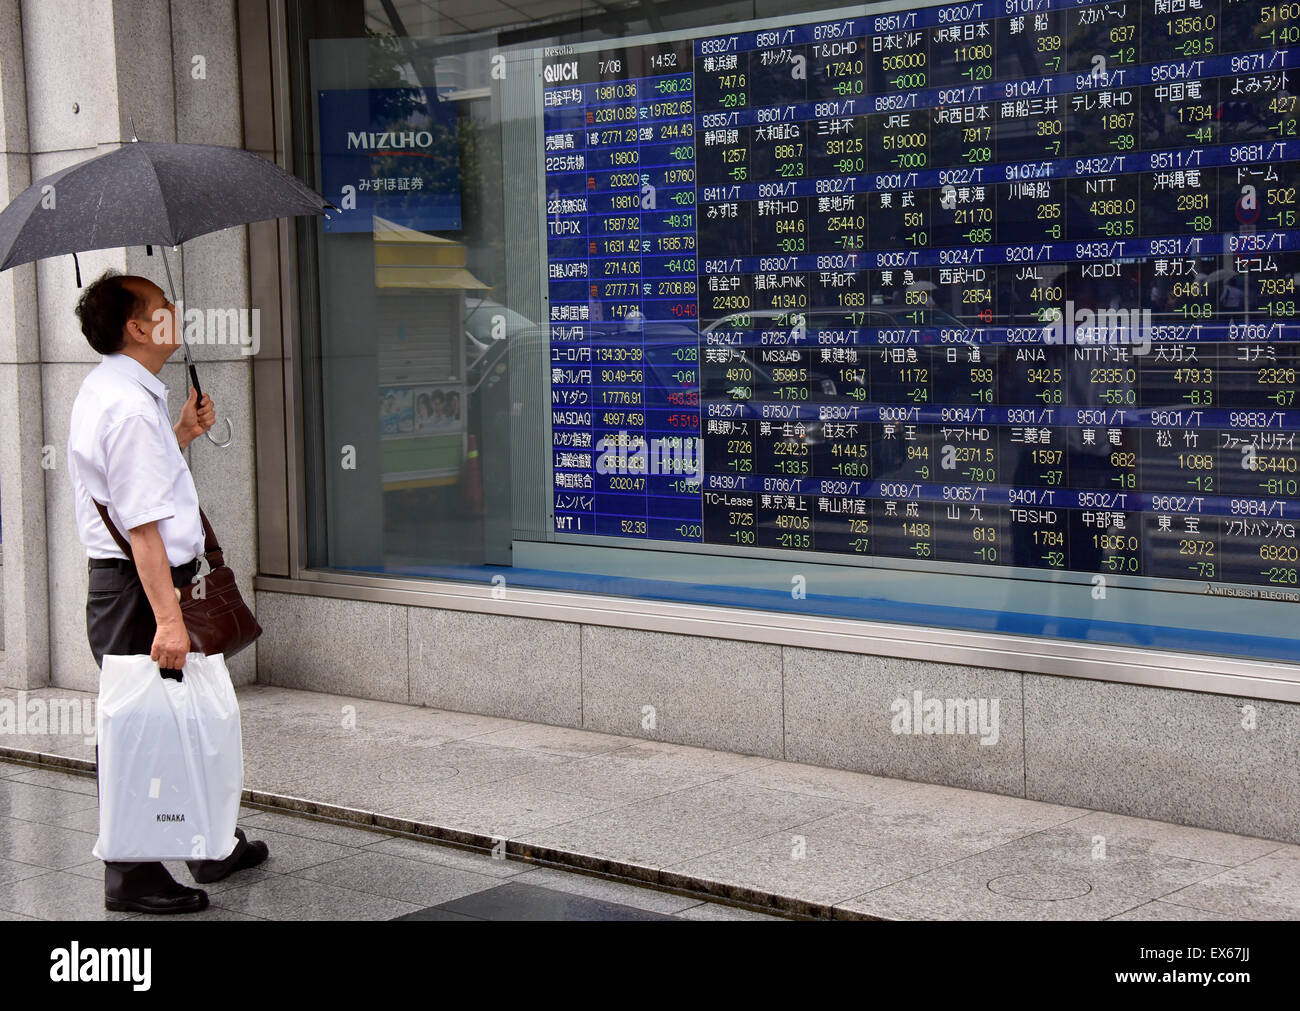 Tokyo, Japan. 8th July, 2015. Japan's stocks sink below the psychologically important 20,000 mark on Wednesday, July 8, 2015, on the Tokyo Stock Exchange market to a seven-week low on concerns about a meltdown in Chinese shares and the Greece debt crisis.The 225-issue Nikkei Stock Average fell to as low as 19,737.64, its lowest level since May 18. Credit:  Natsuki Sakai/AFLO/Alamy Live News Stock Photo